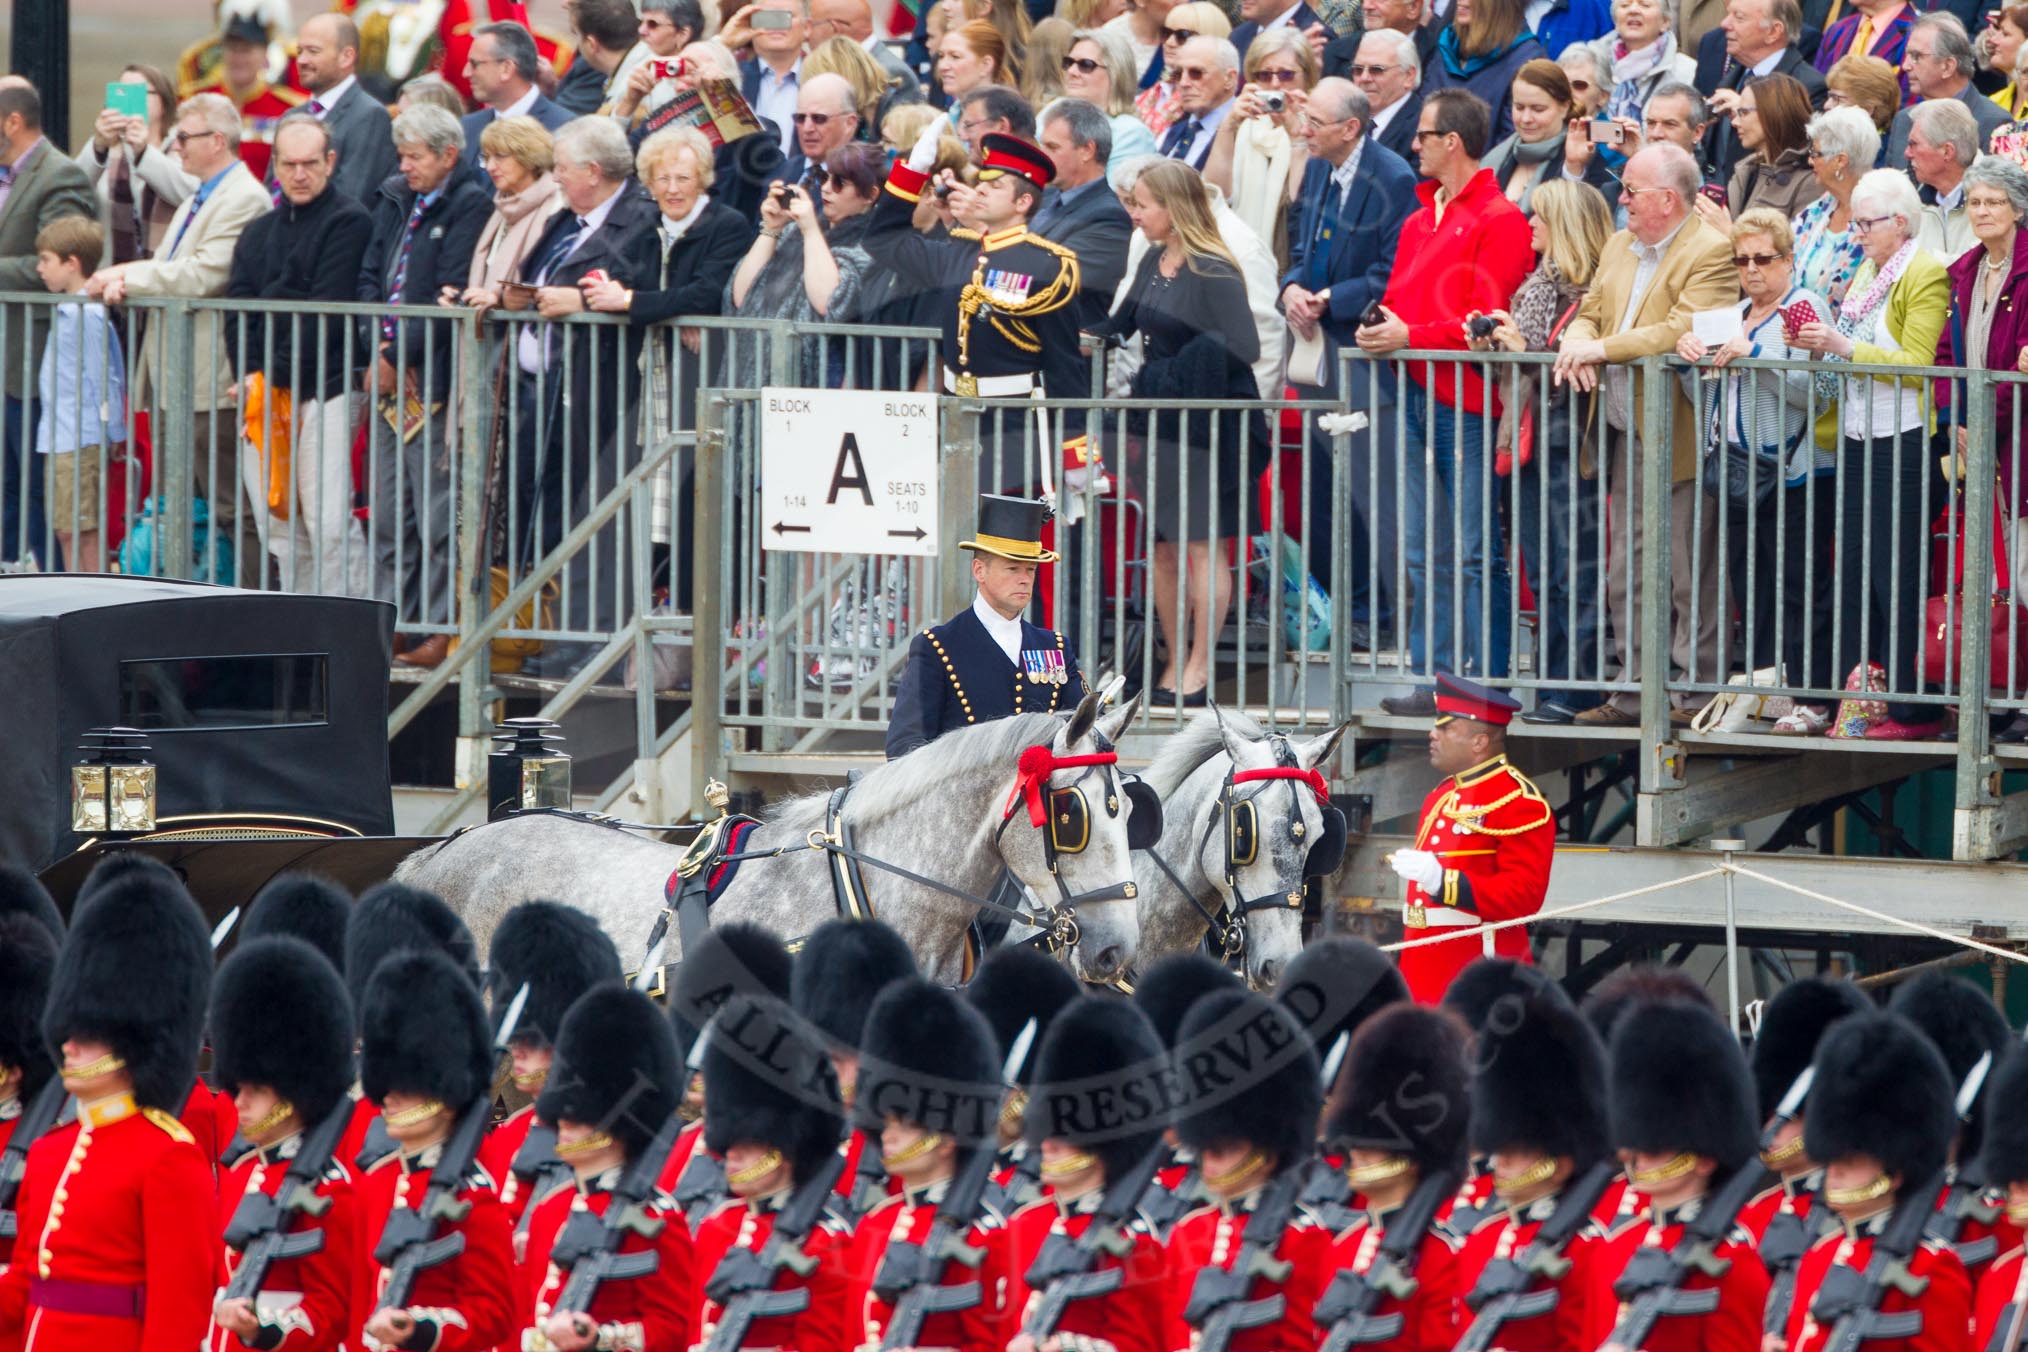 The Colonel's Review 2016.
Horse Guards Parade, Westminster,
London,

United Kingdom,
on 04 June 2016 at 10:58, image #154